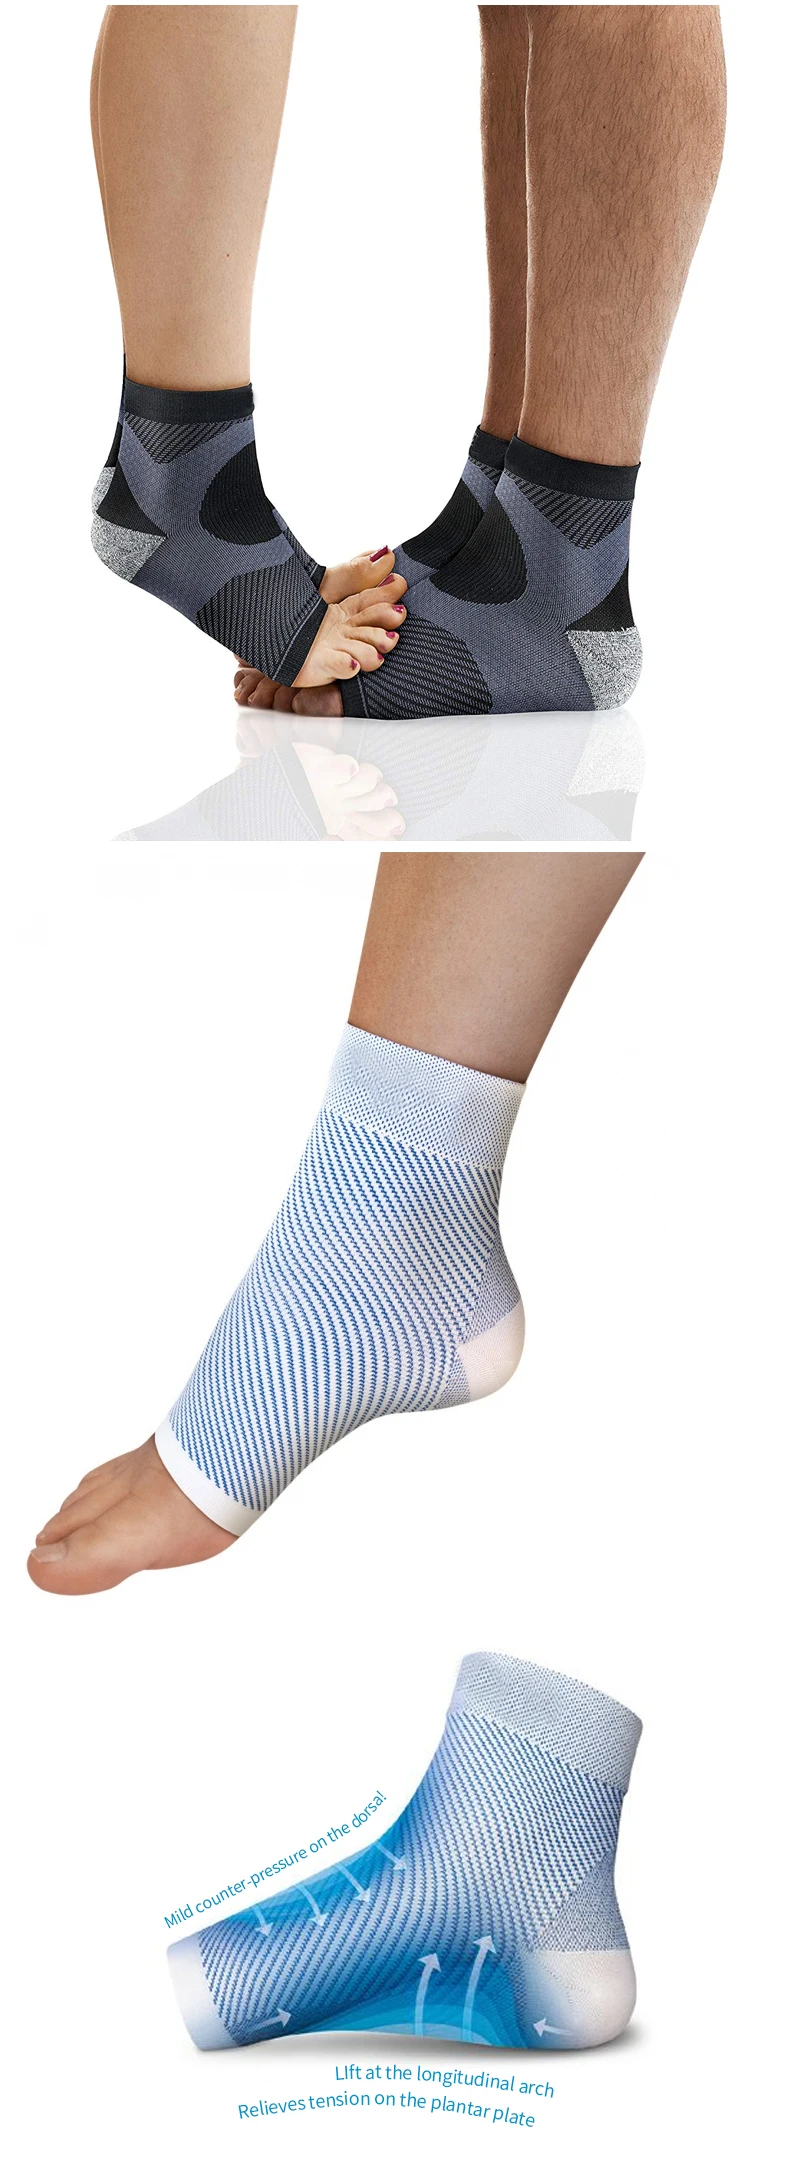 Enerup Plantar Fasciitis Knitted Sleeve Sport Band Tobillera Elastica Support Ankle Foot Orthosis Brace